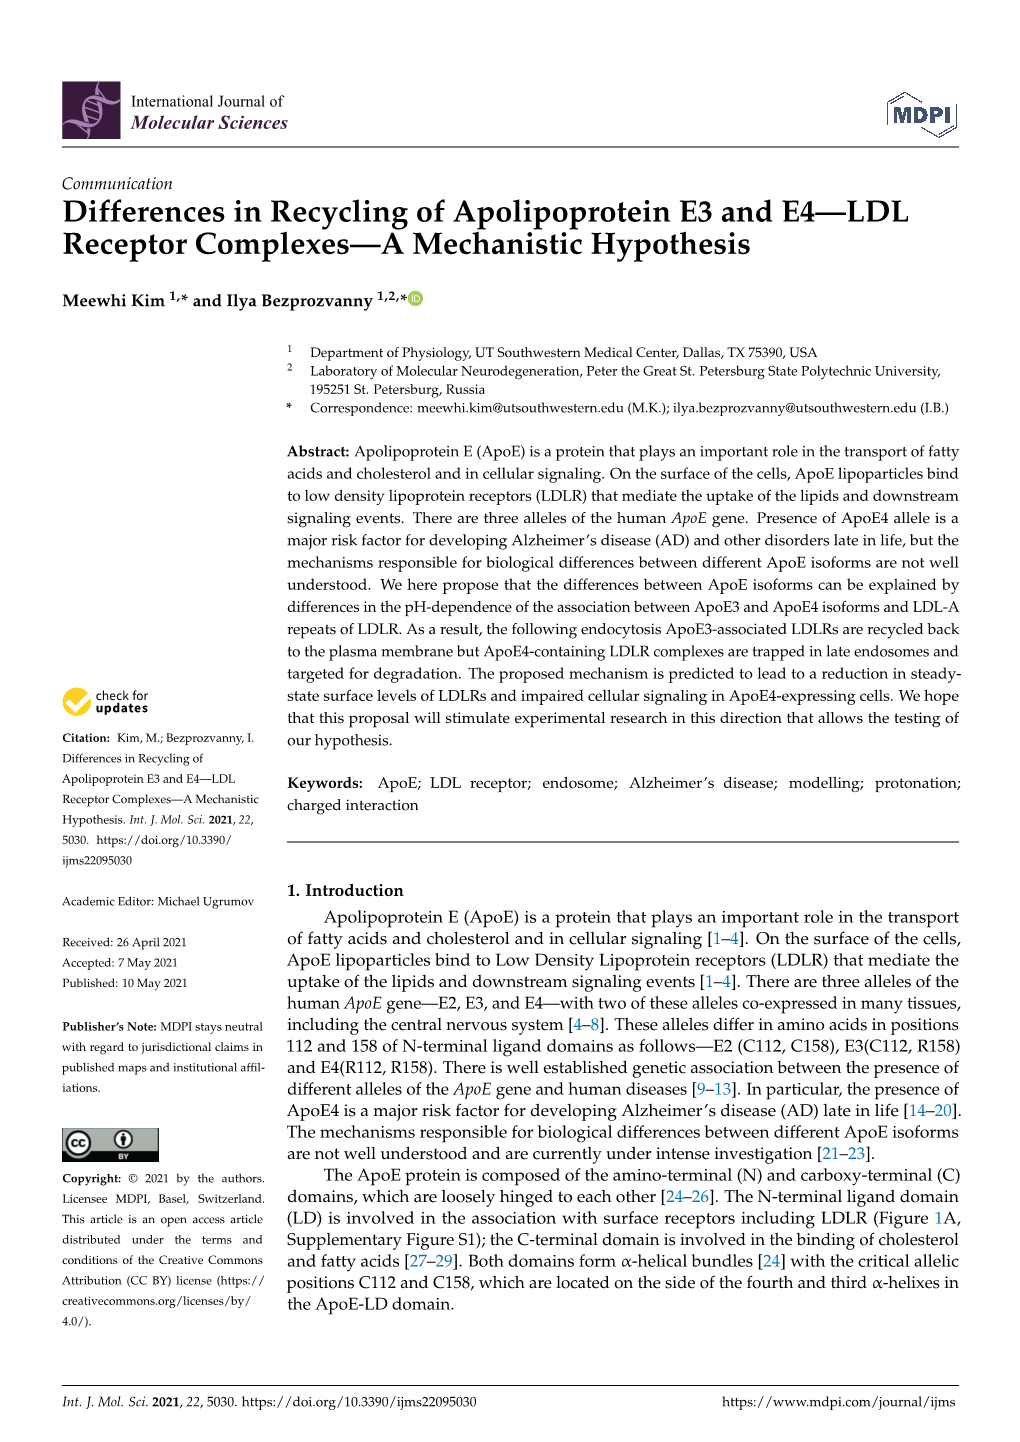 Differences in Recycling of Apolipoprotein E3 and E4—LDL Receptor Complexes—A Mechanistic Hypothesis